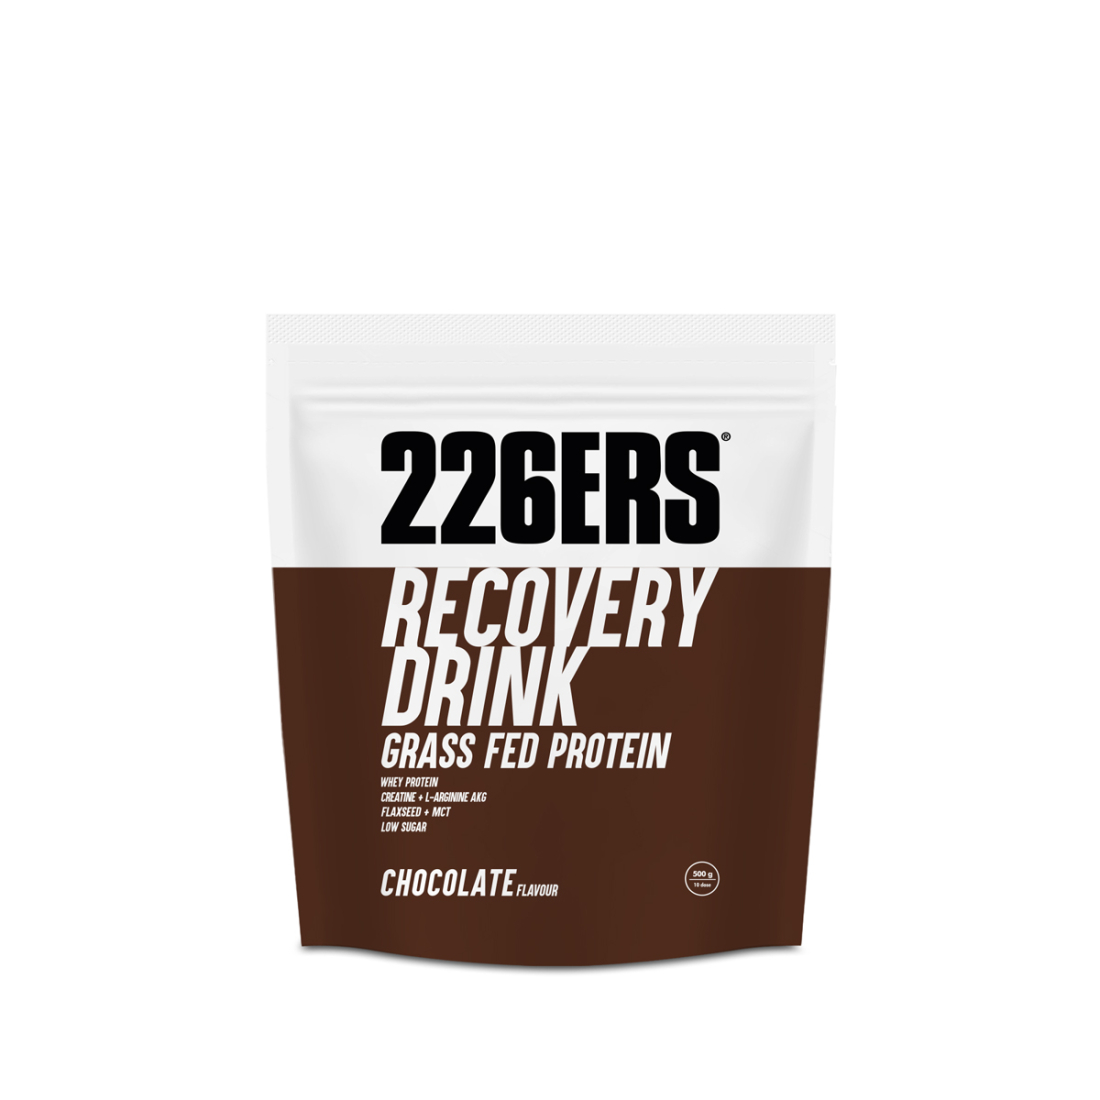 RECOVERY DRINK - Muscle Recuperator